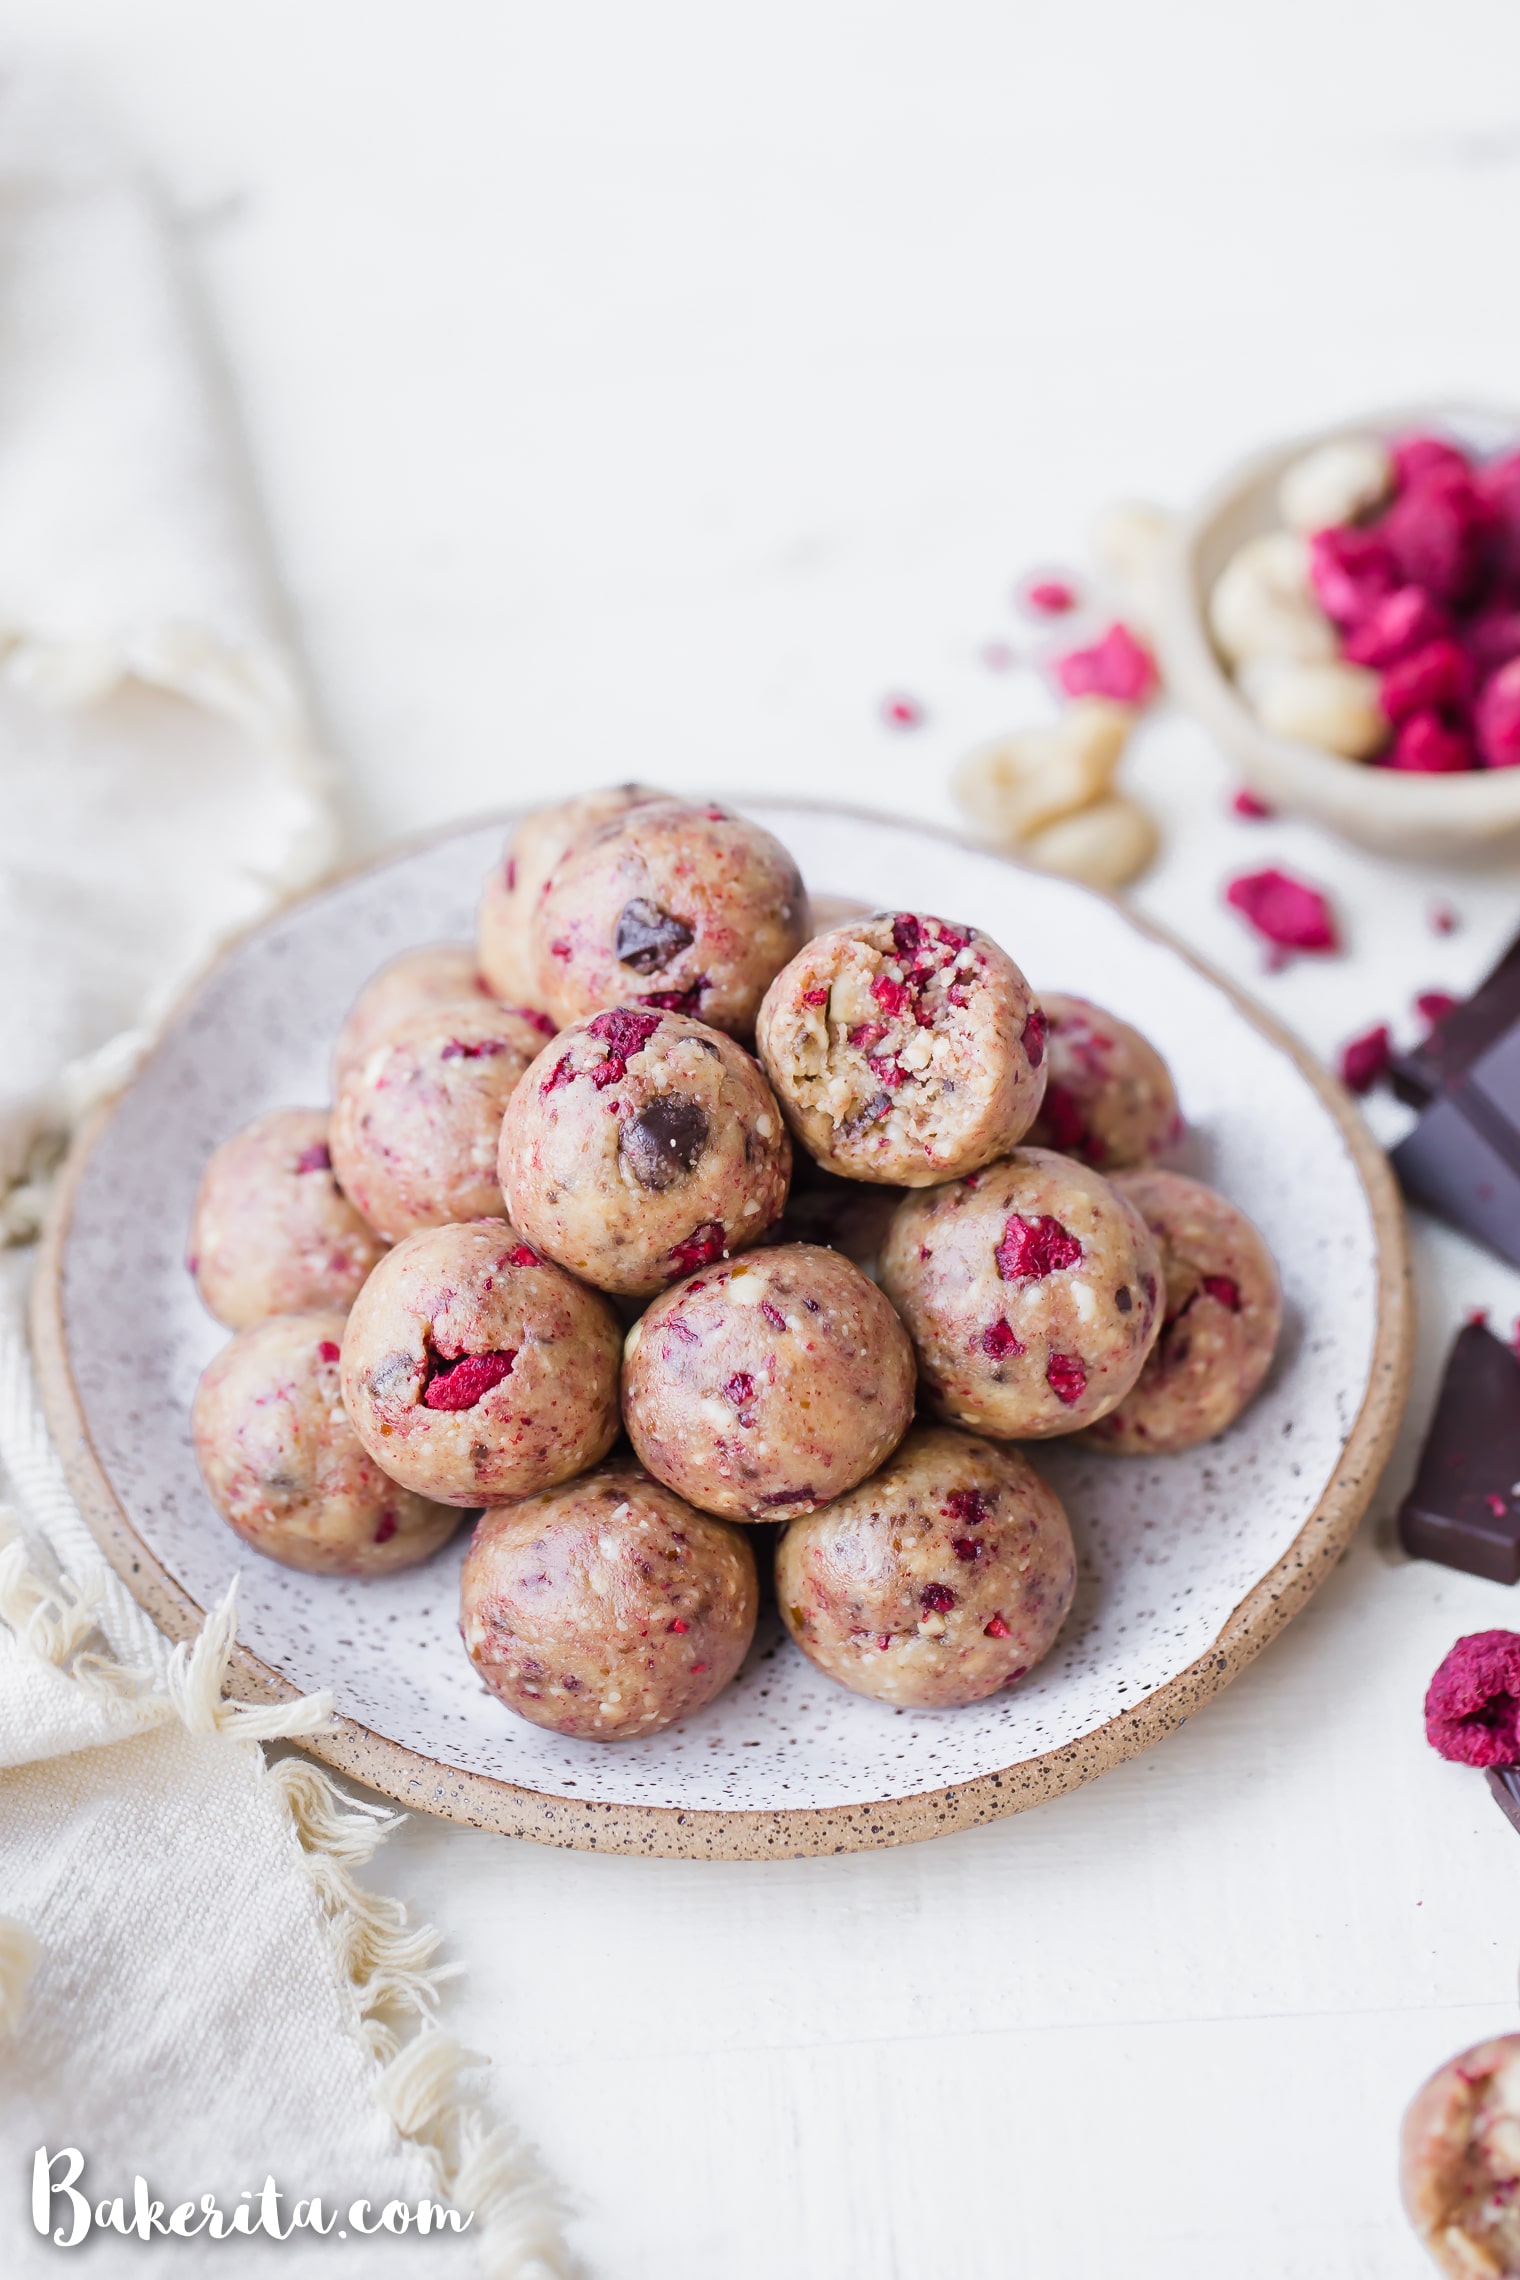 These Raspberry Dark Chocolate Energy Bites are deliciously filling and laced with the bold flavor of raspberries and shards of dark chocolate. They make the perfect gluten-free, paleo, and vegan snack or treat.